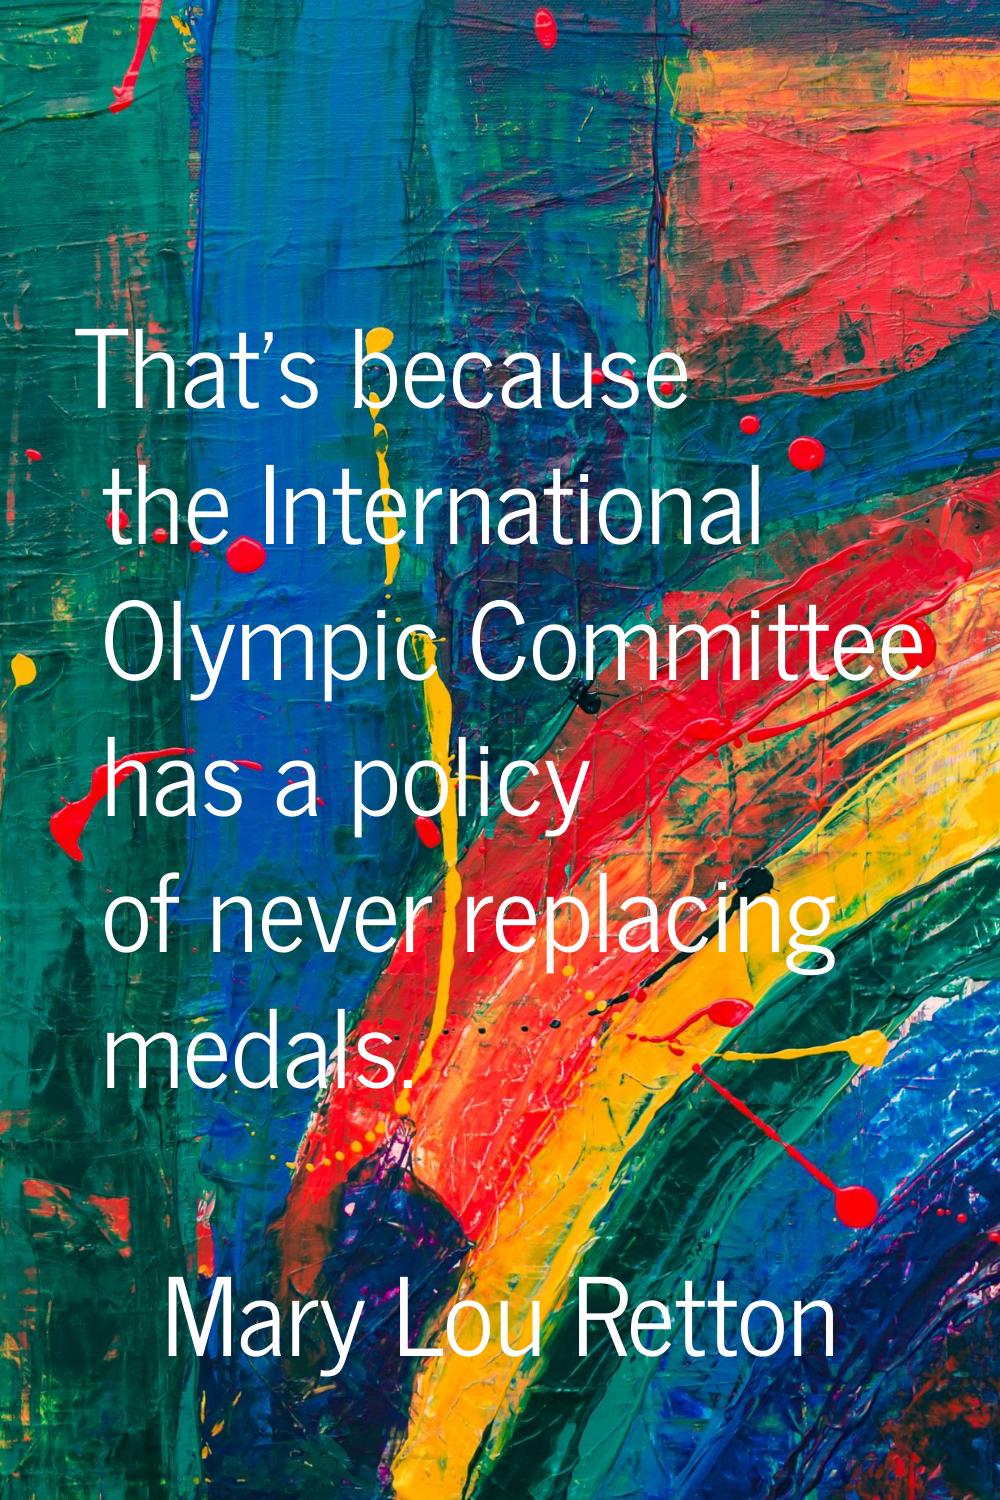 That's because the International Olympic Committee has a policy of never replacing medals.